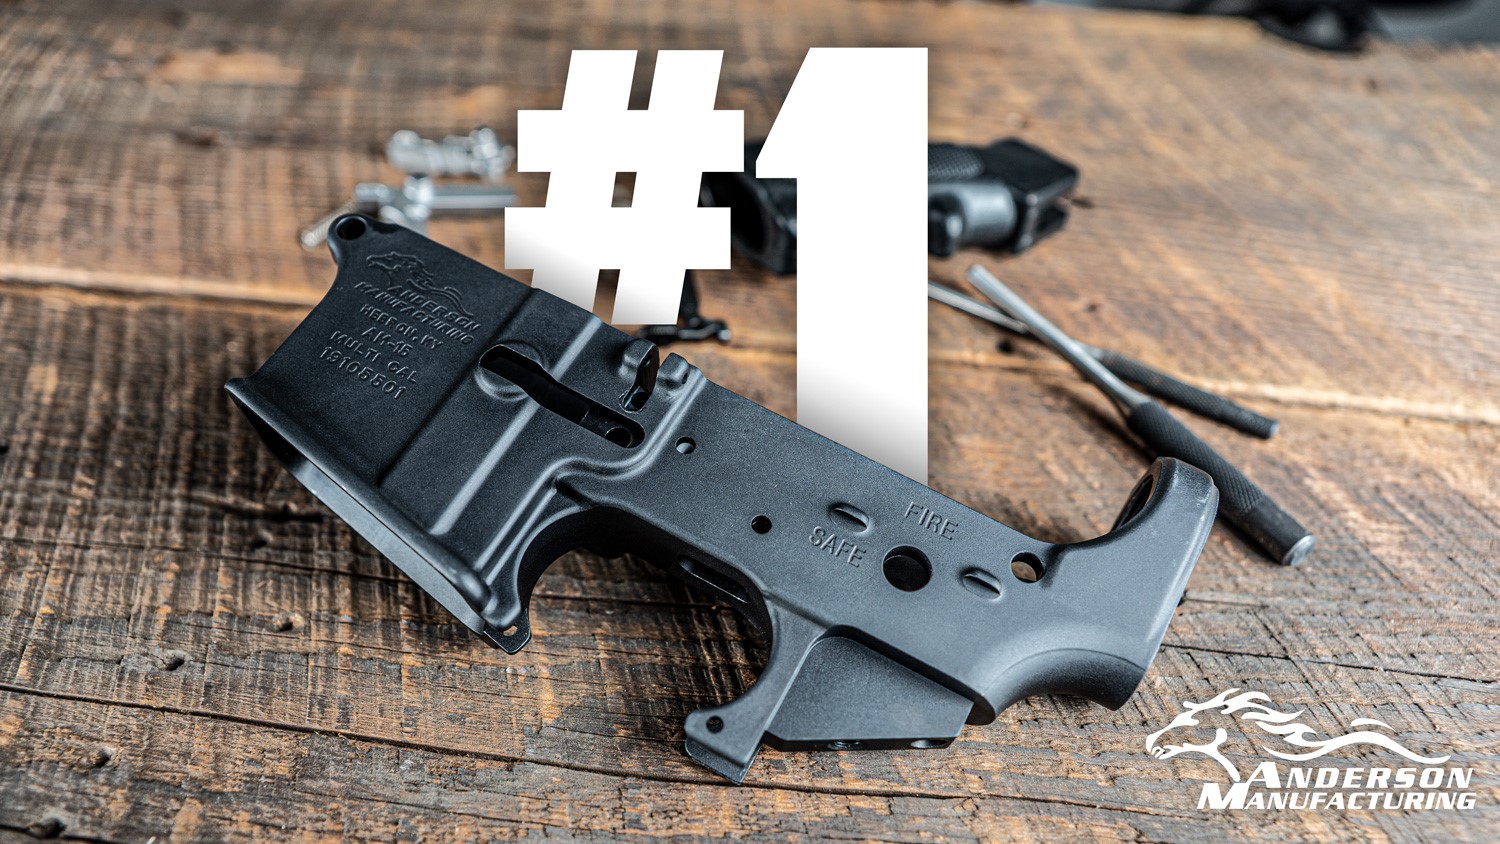 ANDERSON MANUFACTURING RANKED NUMBER ONE IN  U.S. MISCELLANEOUS FIREARMS PRODUCTION FOR SECOND YEAR IN A ROW